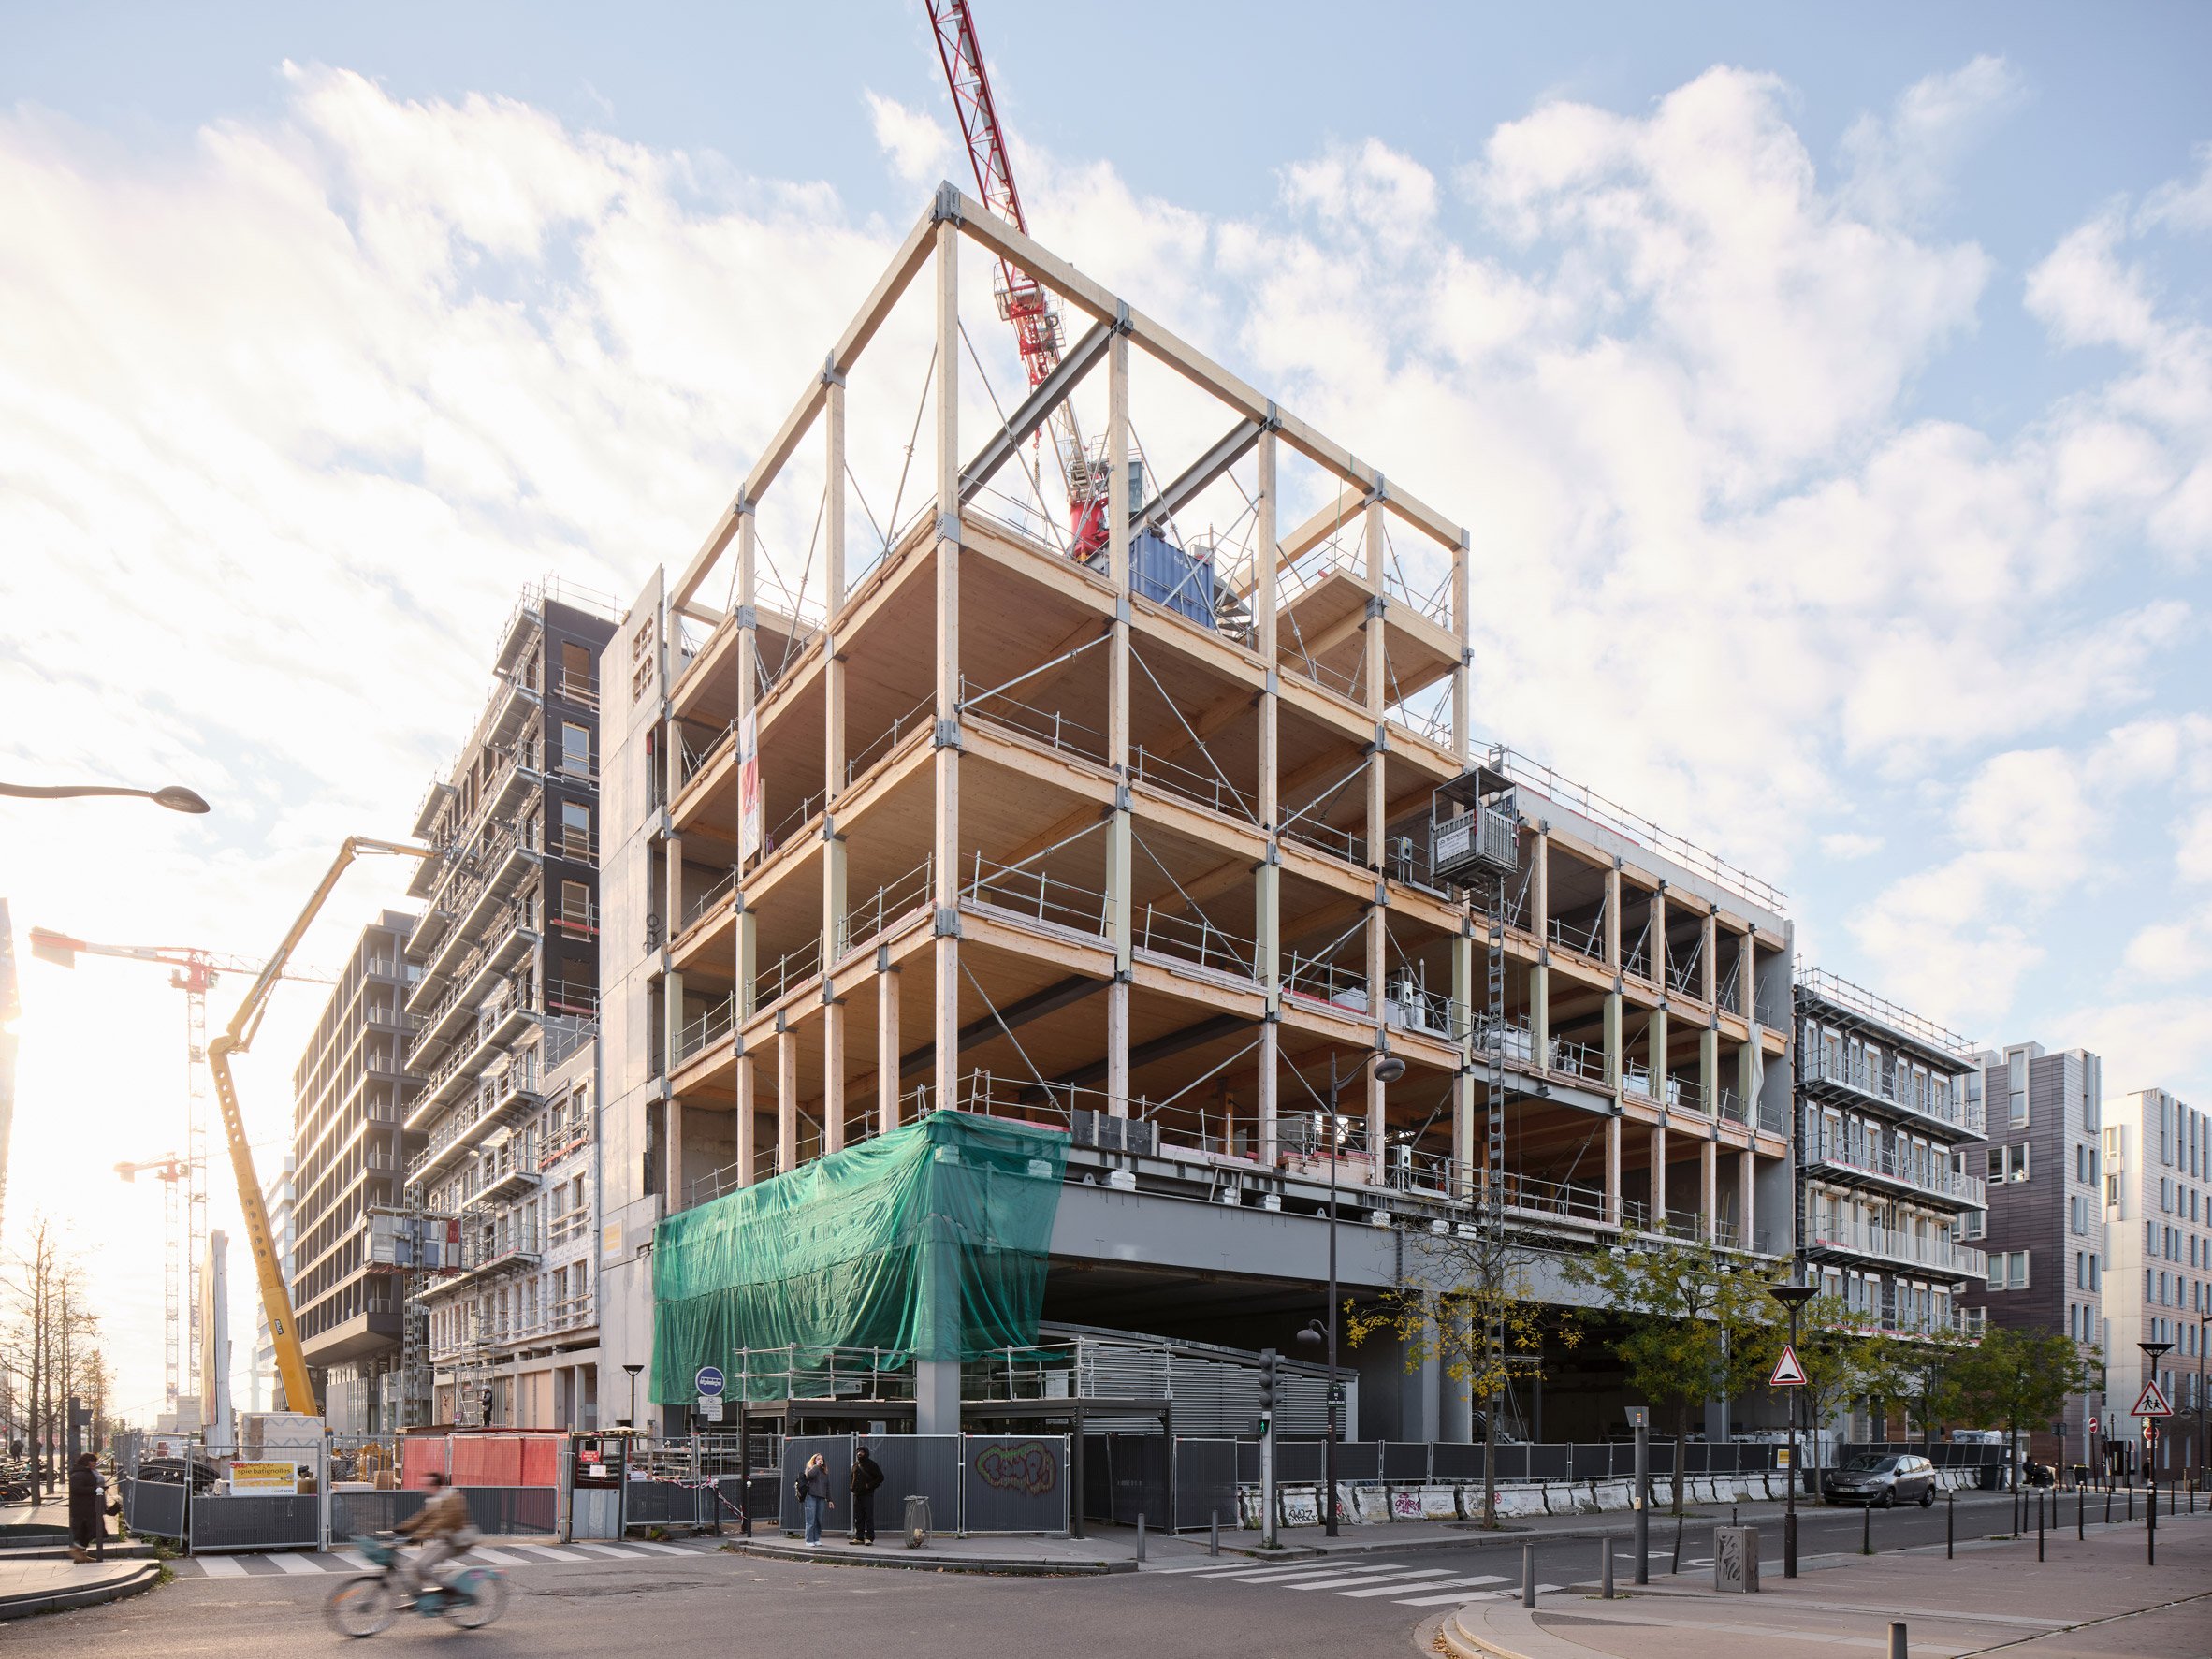 Construction of the University of Chicago centre in Paris by Studio Gang